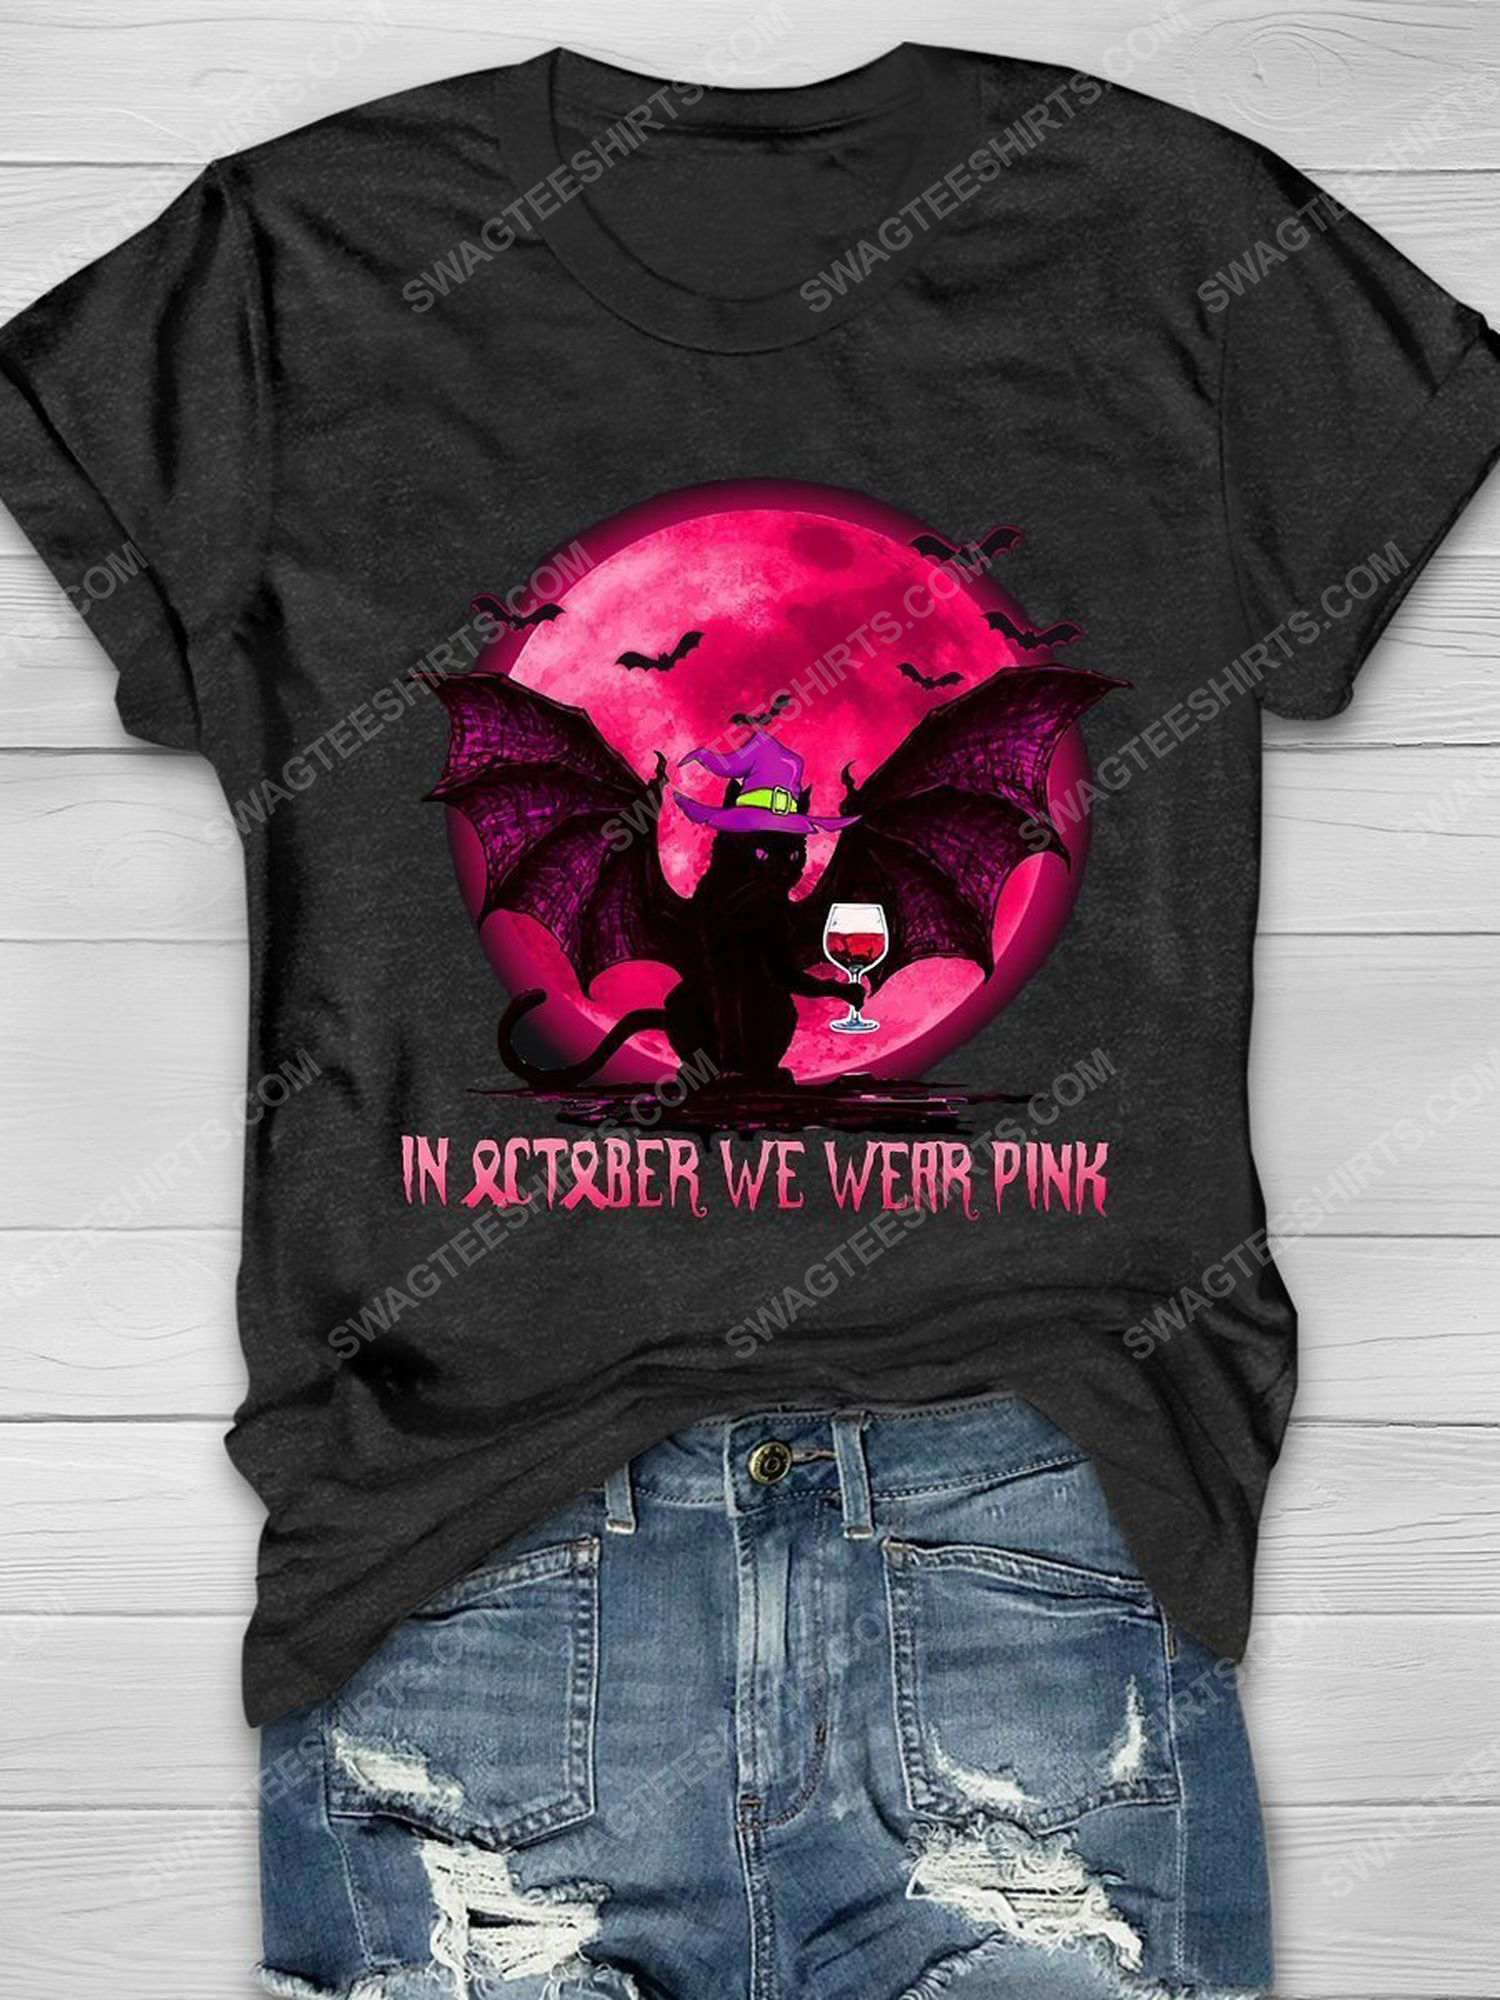 Breast cancer in october we wear pink cat and wine shirt 1 - Copy